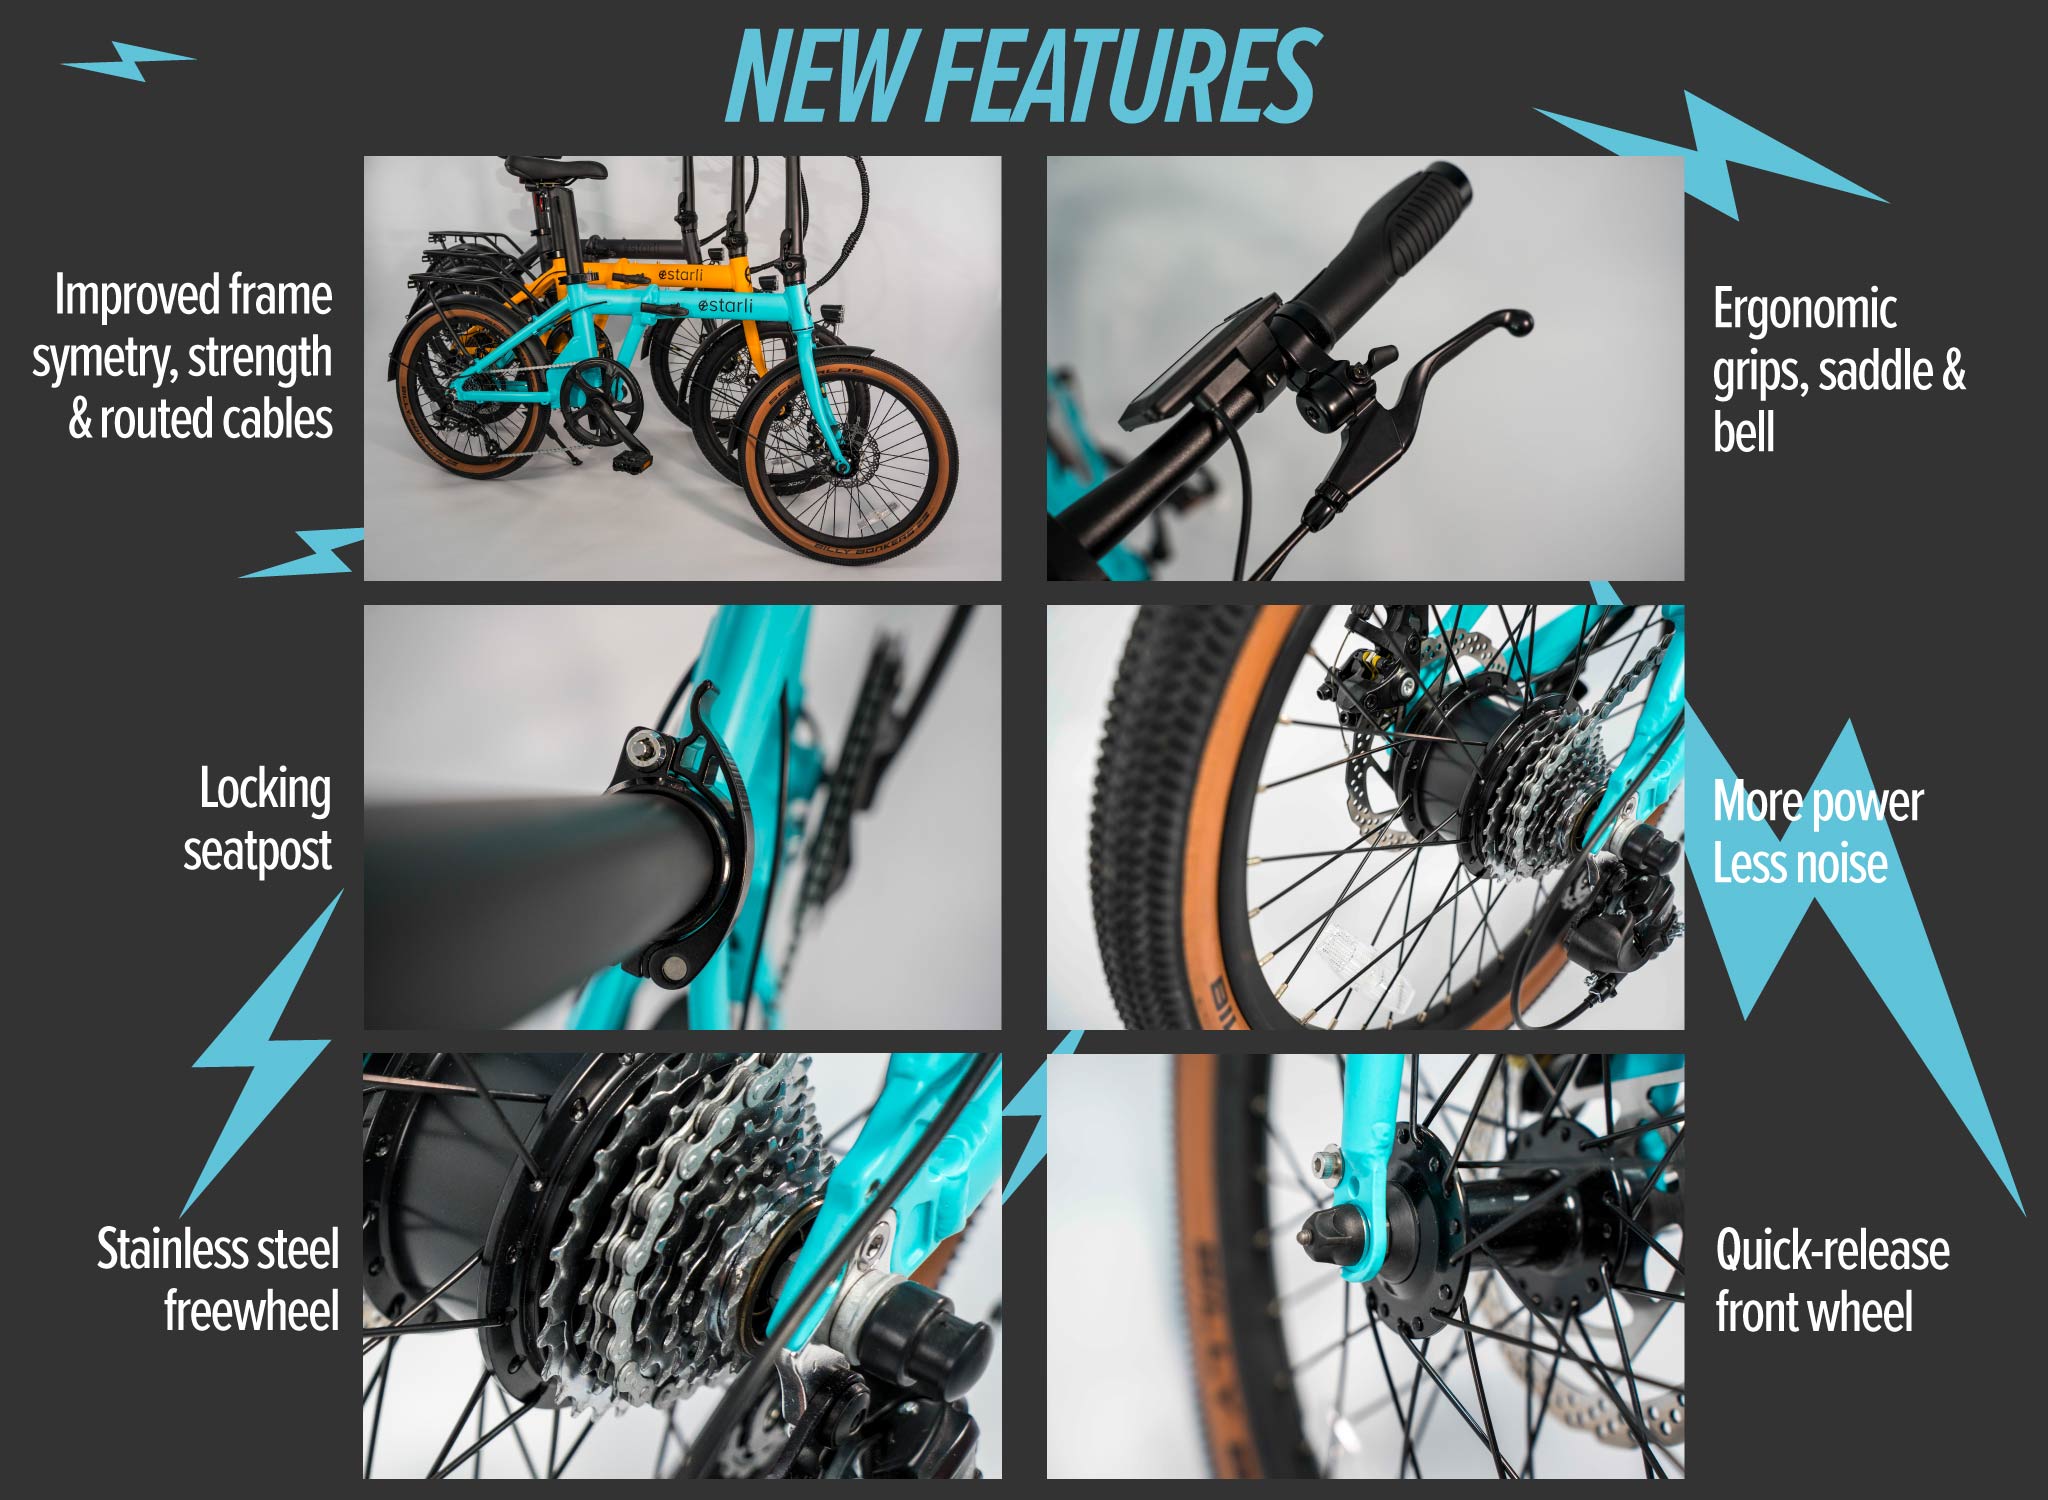 New features of the e20.7 comfort include: Improved frame symmetry, strength and routed cables, ergonomic grips saddle and bell, locking seatpost, more power and less noise, a stainless steel freewheel and a quick-release front wheel. 